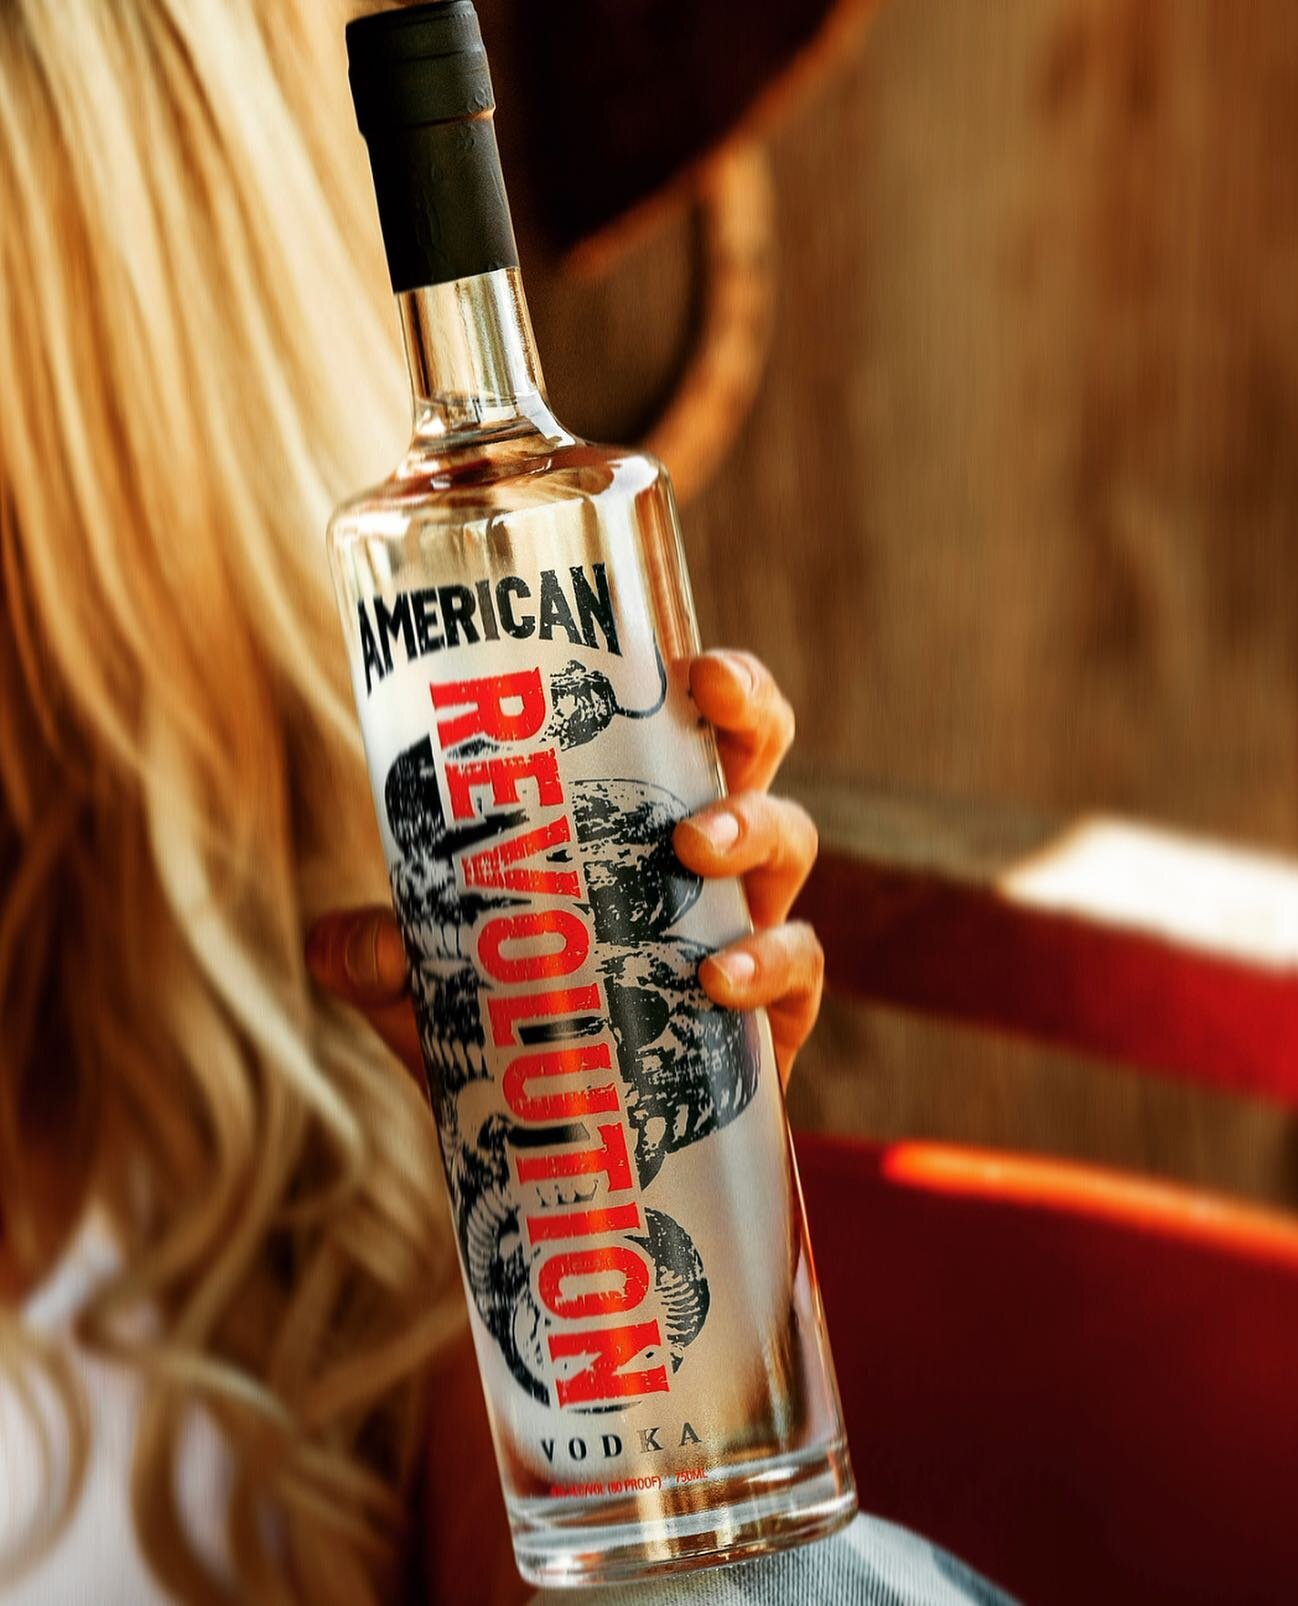 When you try it the American way, you&rsquo;ll never have it any other way. Have a great weekend 🇺🇸💫

.
.
.
.
#drink #drinks #food #cocktails #bar #cocktail #bartender #vodka #love #military #mixology #party #alcohol #drinkstagram #support #arizon